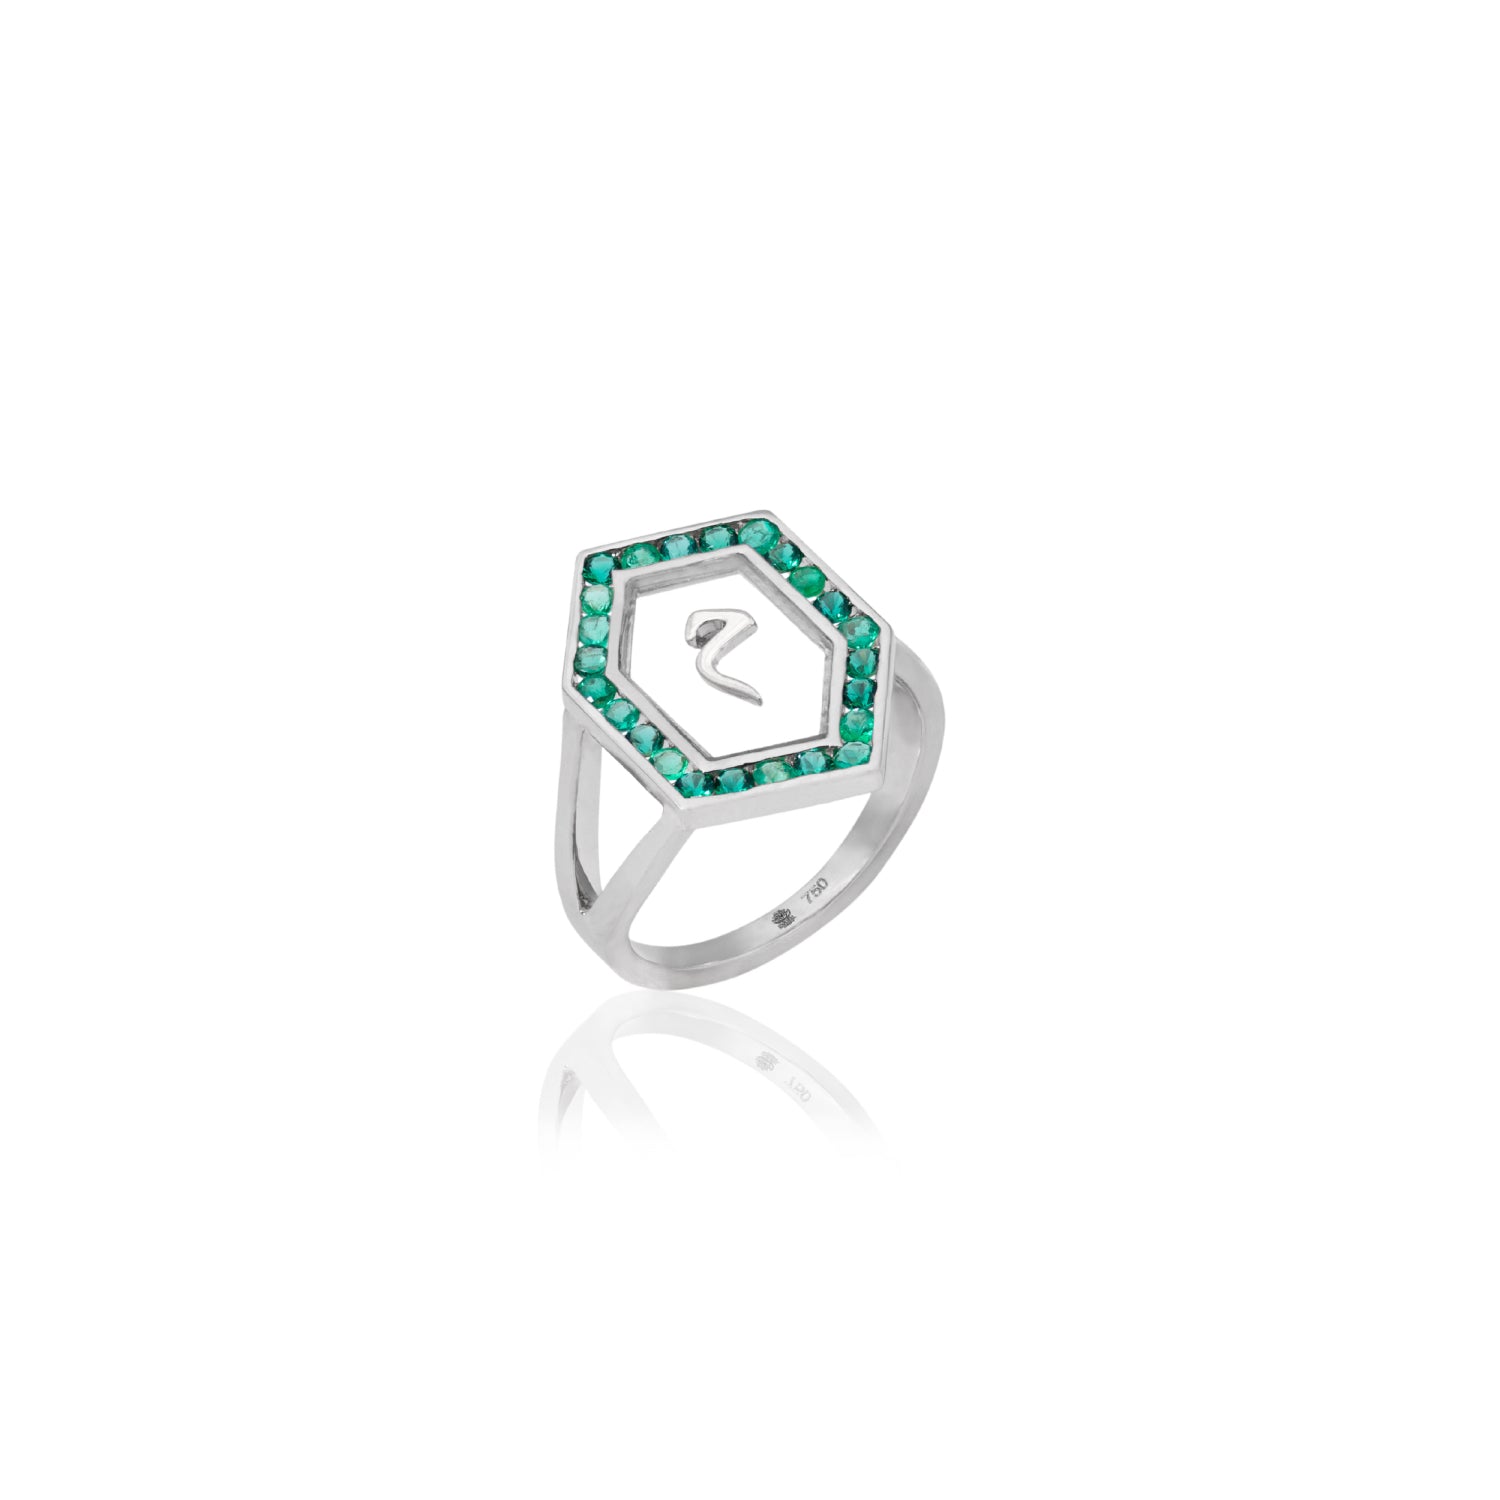 Qamoos 1.0 Letter م Emerald Ring in White Gold